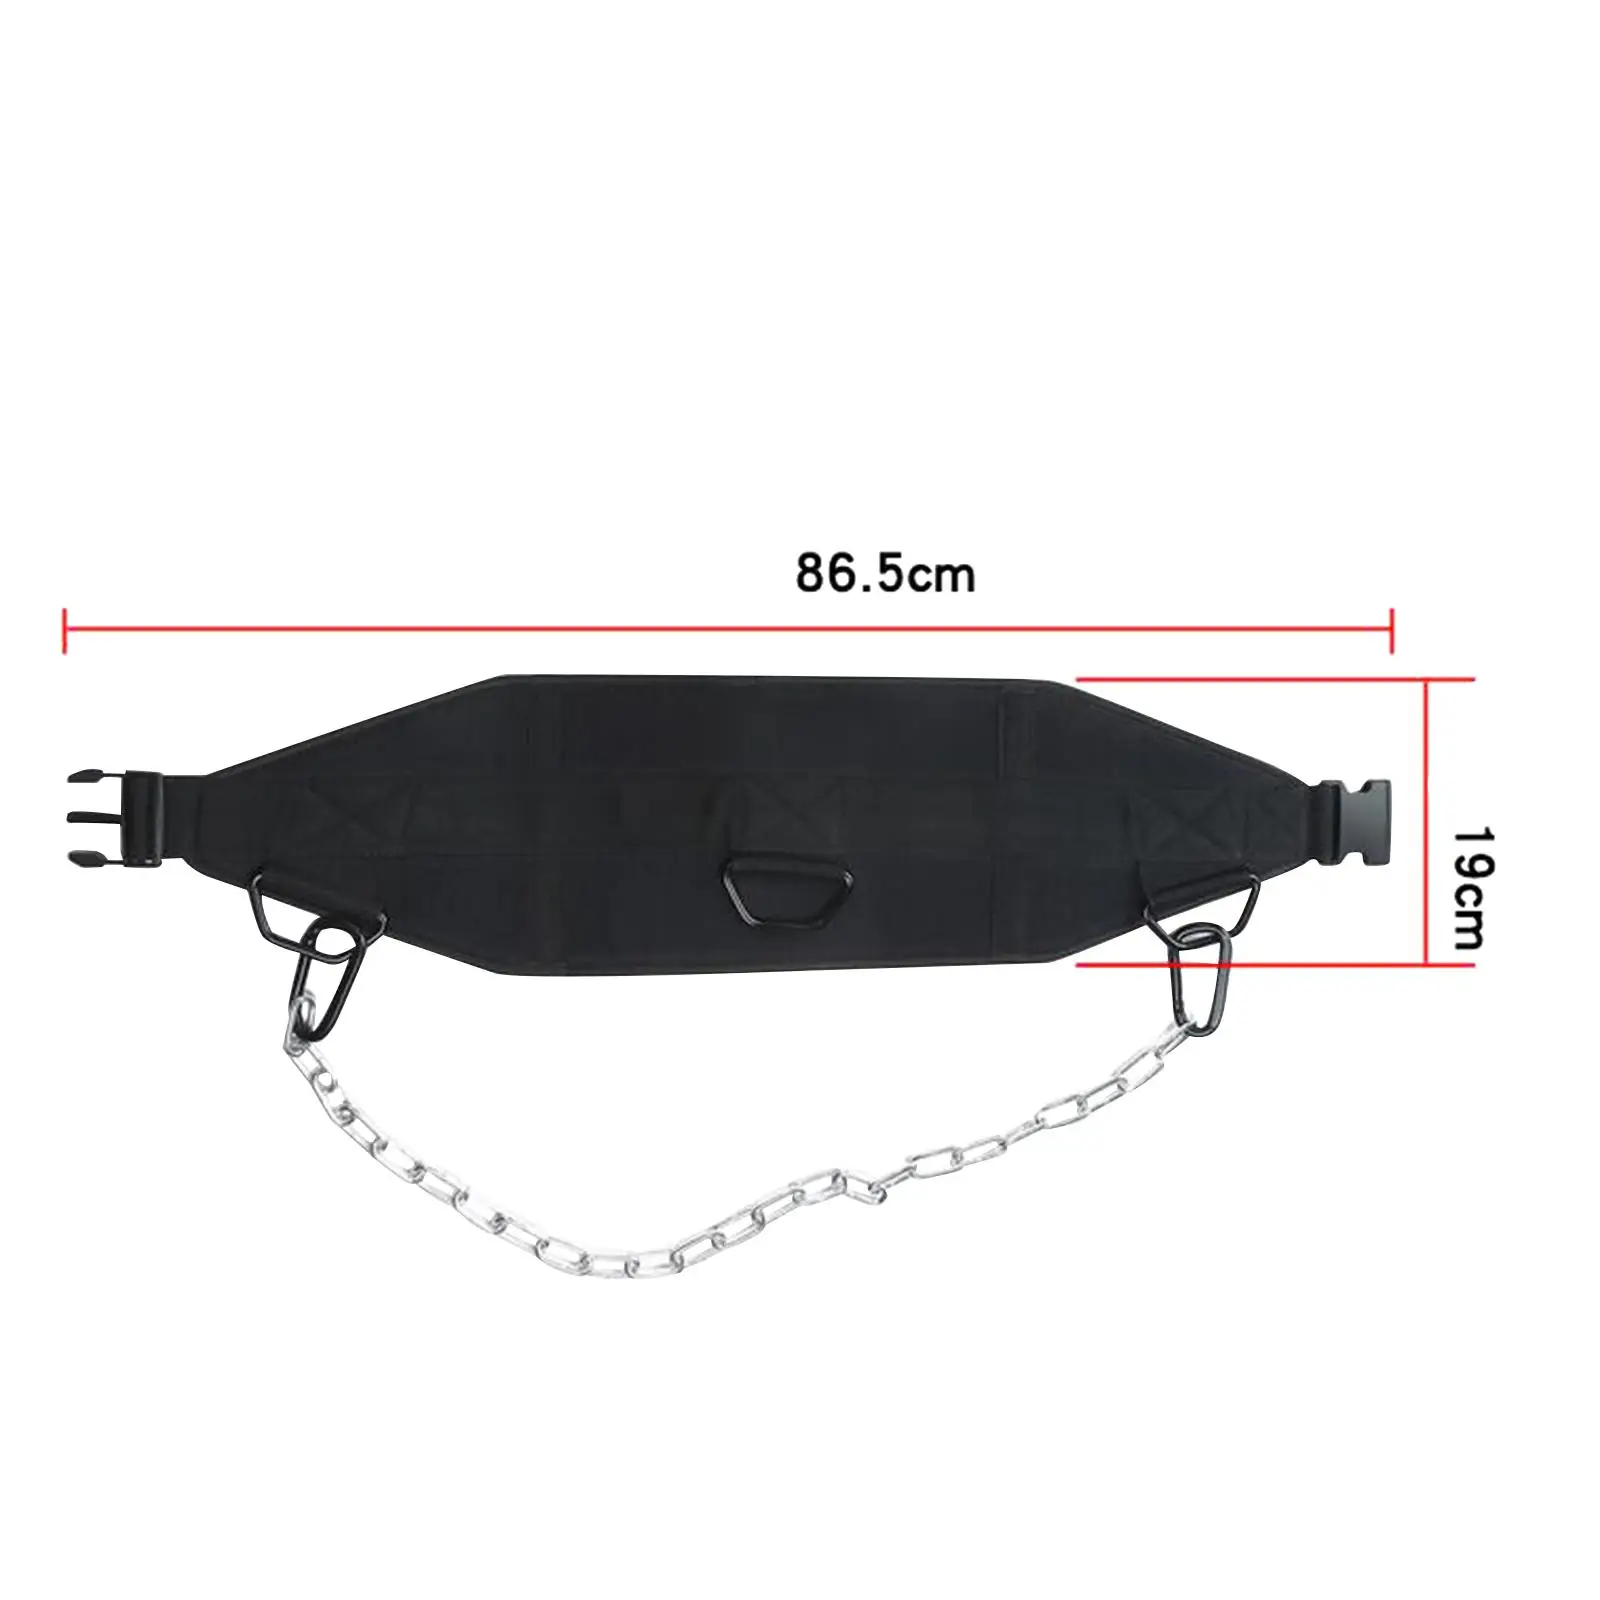 Weightlifting Dipping Belt with Chain Accessories Buckle Oxford Cloth Waist Comfortable for Workout Kettlebell Powerlifting Gym